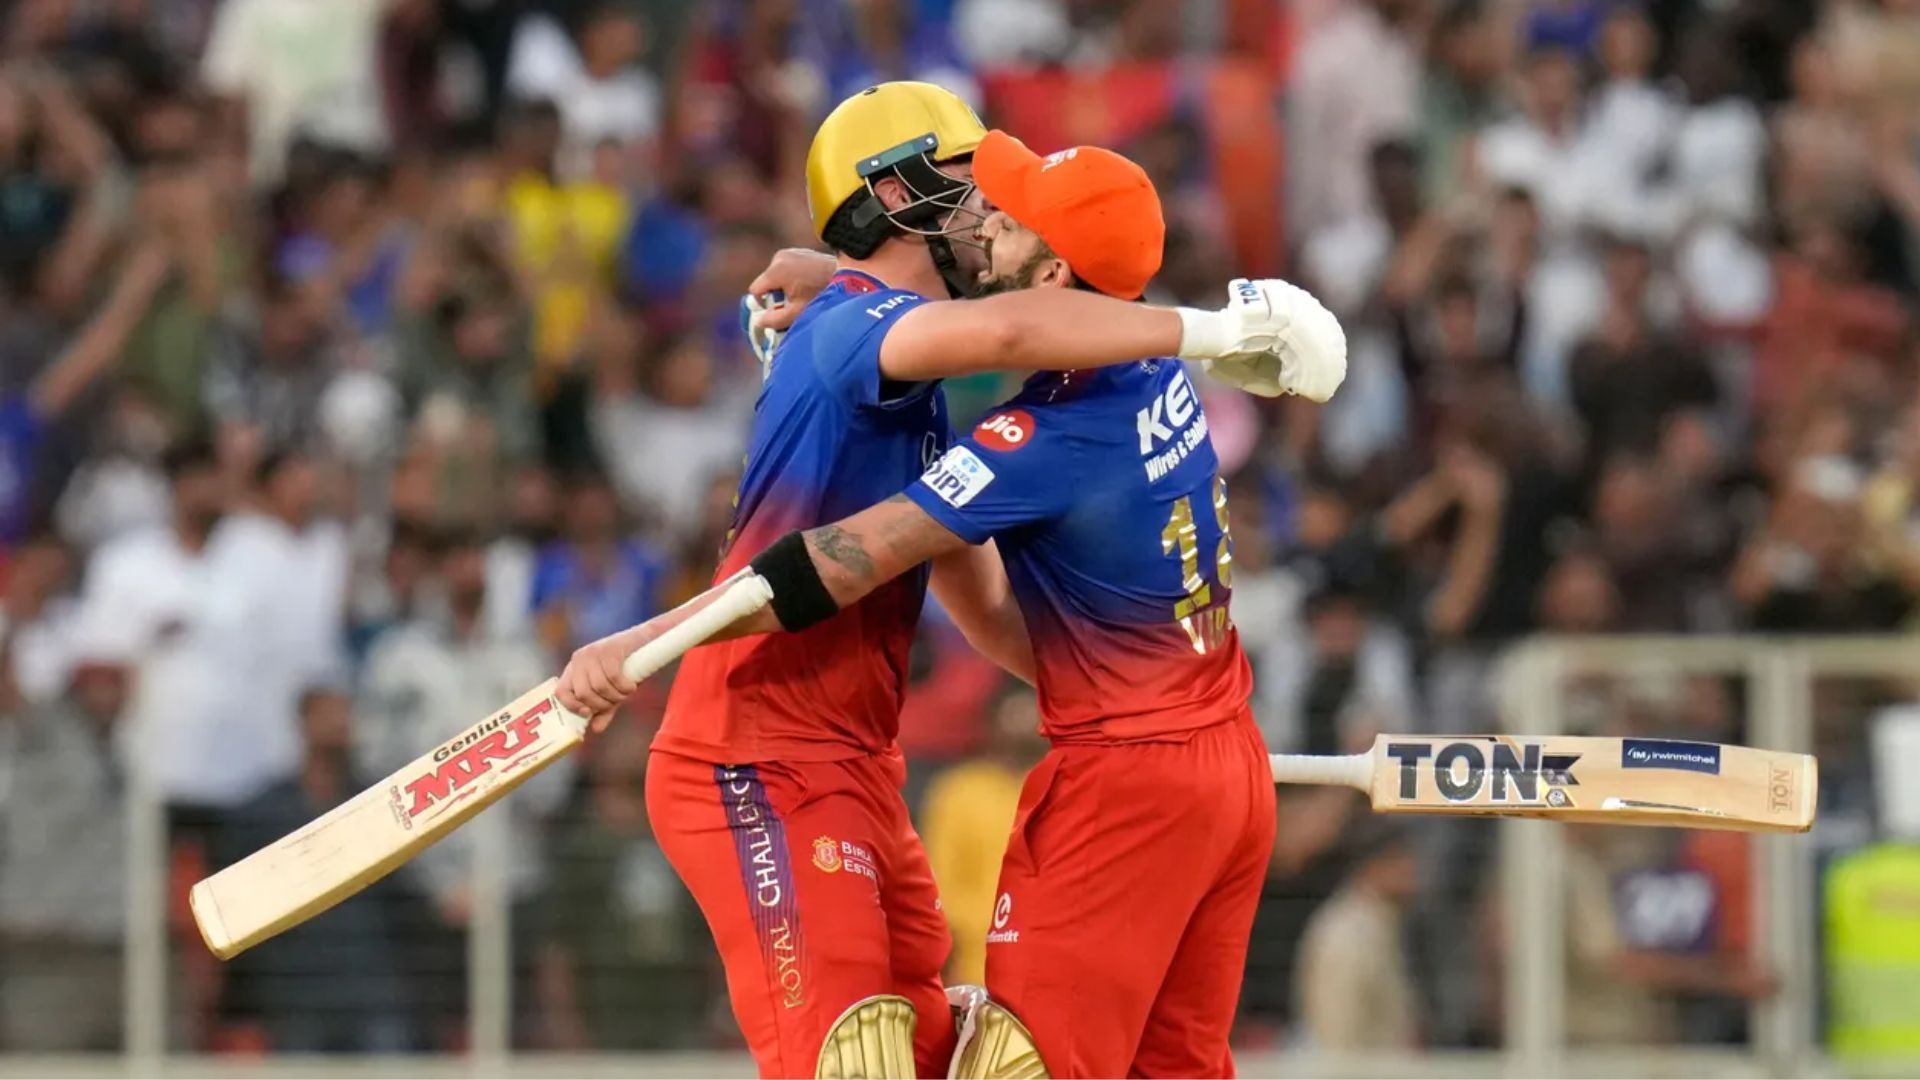 Will Jacks and Virat Kohli hug each other after the former reaches his maiden IPL hundred